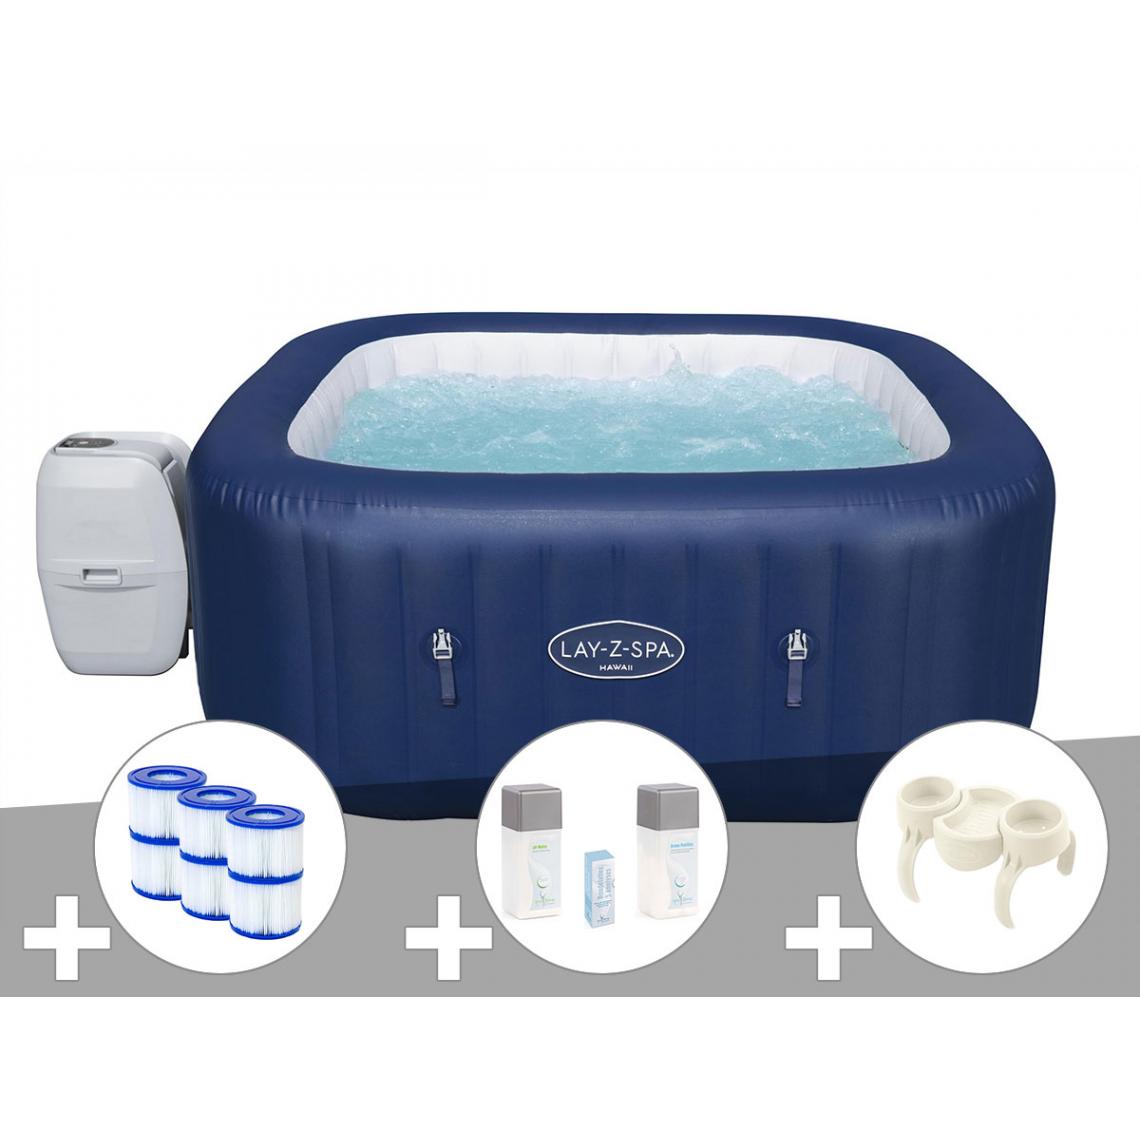 Bestway - Kit spa gonflable Bestway Lay-Z-Spa Hawaii carré Airjet 4/6 places + 6 filtres + Kit traitement brome + Porte-gobelets - Spa gonflable